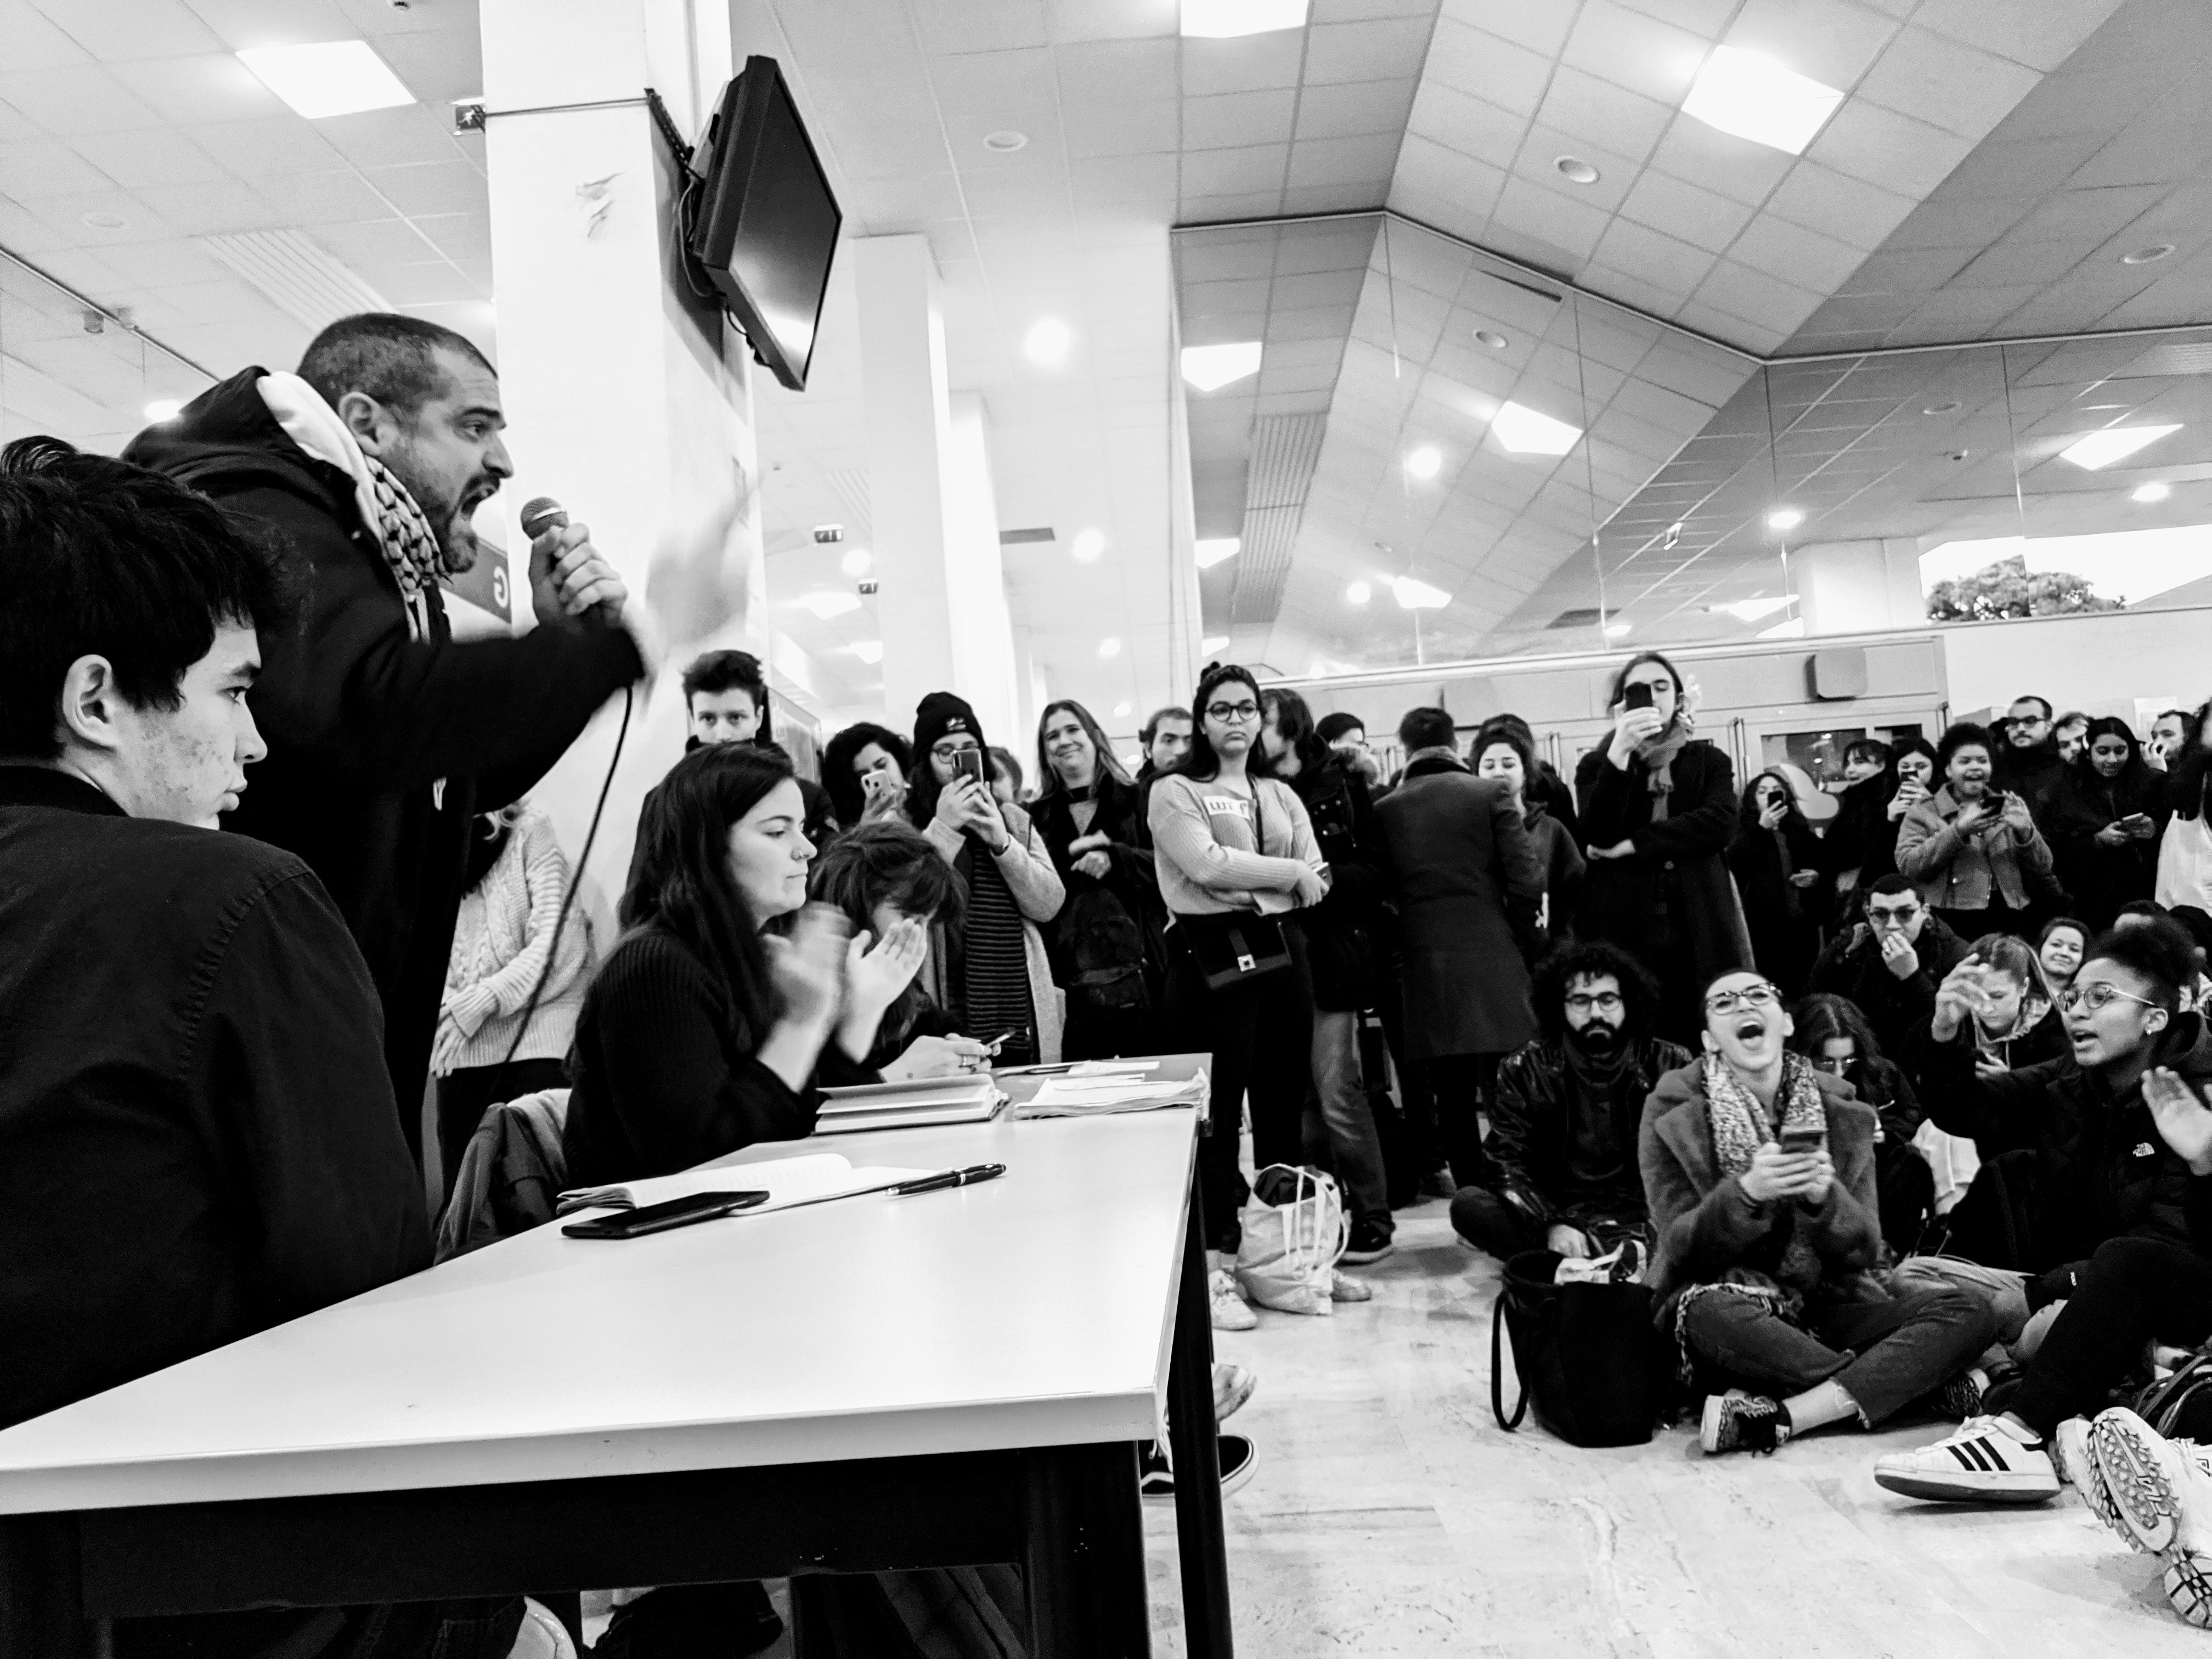 Gaël Quirante, a striking postal worker and revolutionary, addresses a meeting of around 300 students at Nanterre University, January 6.